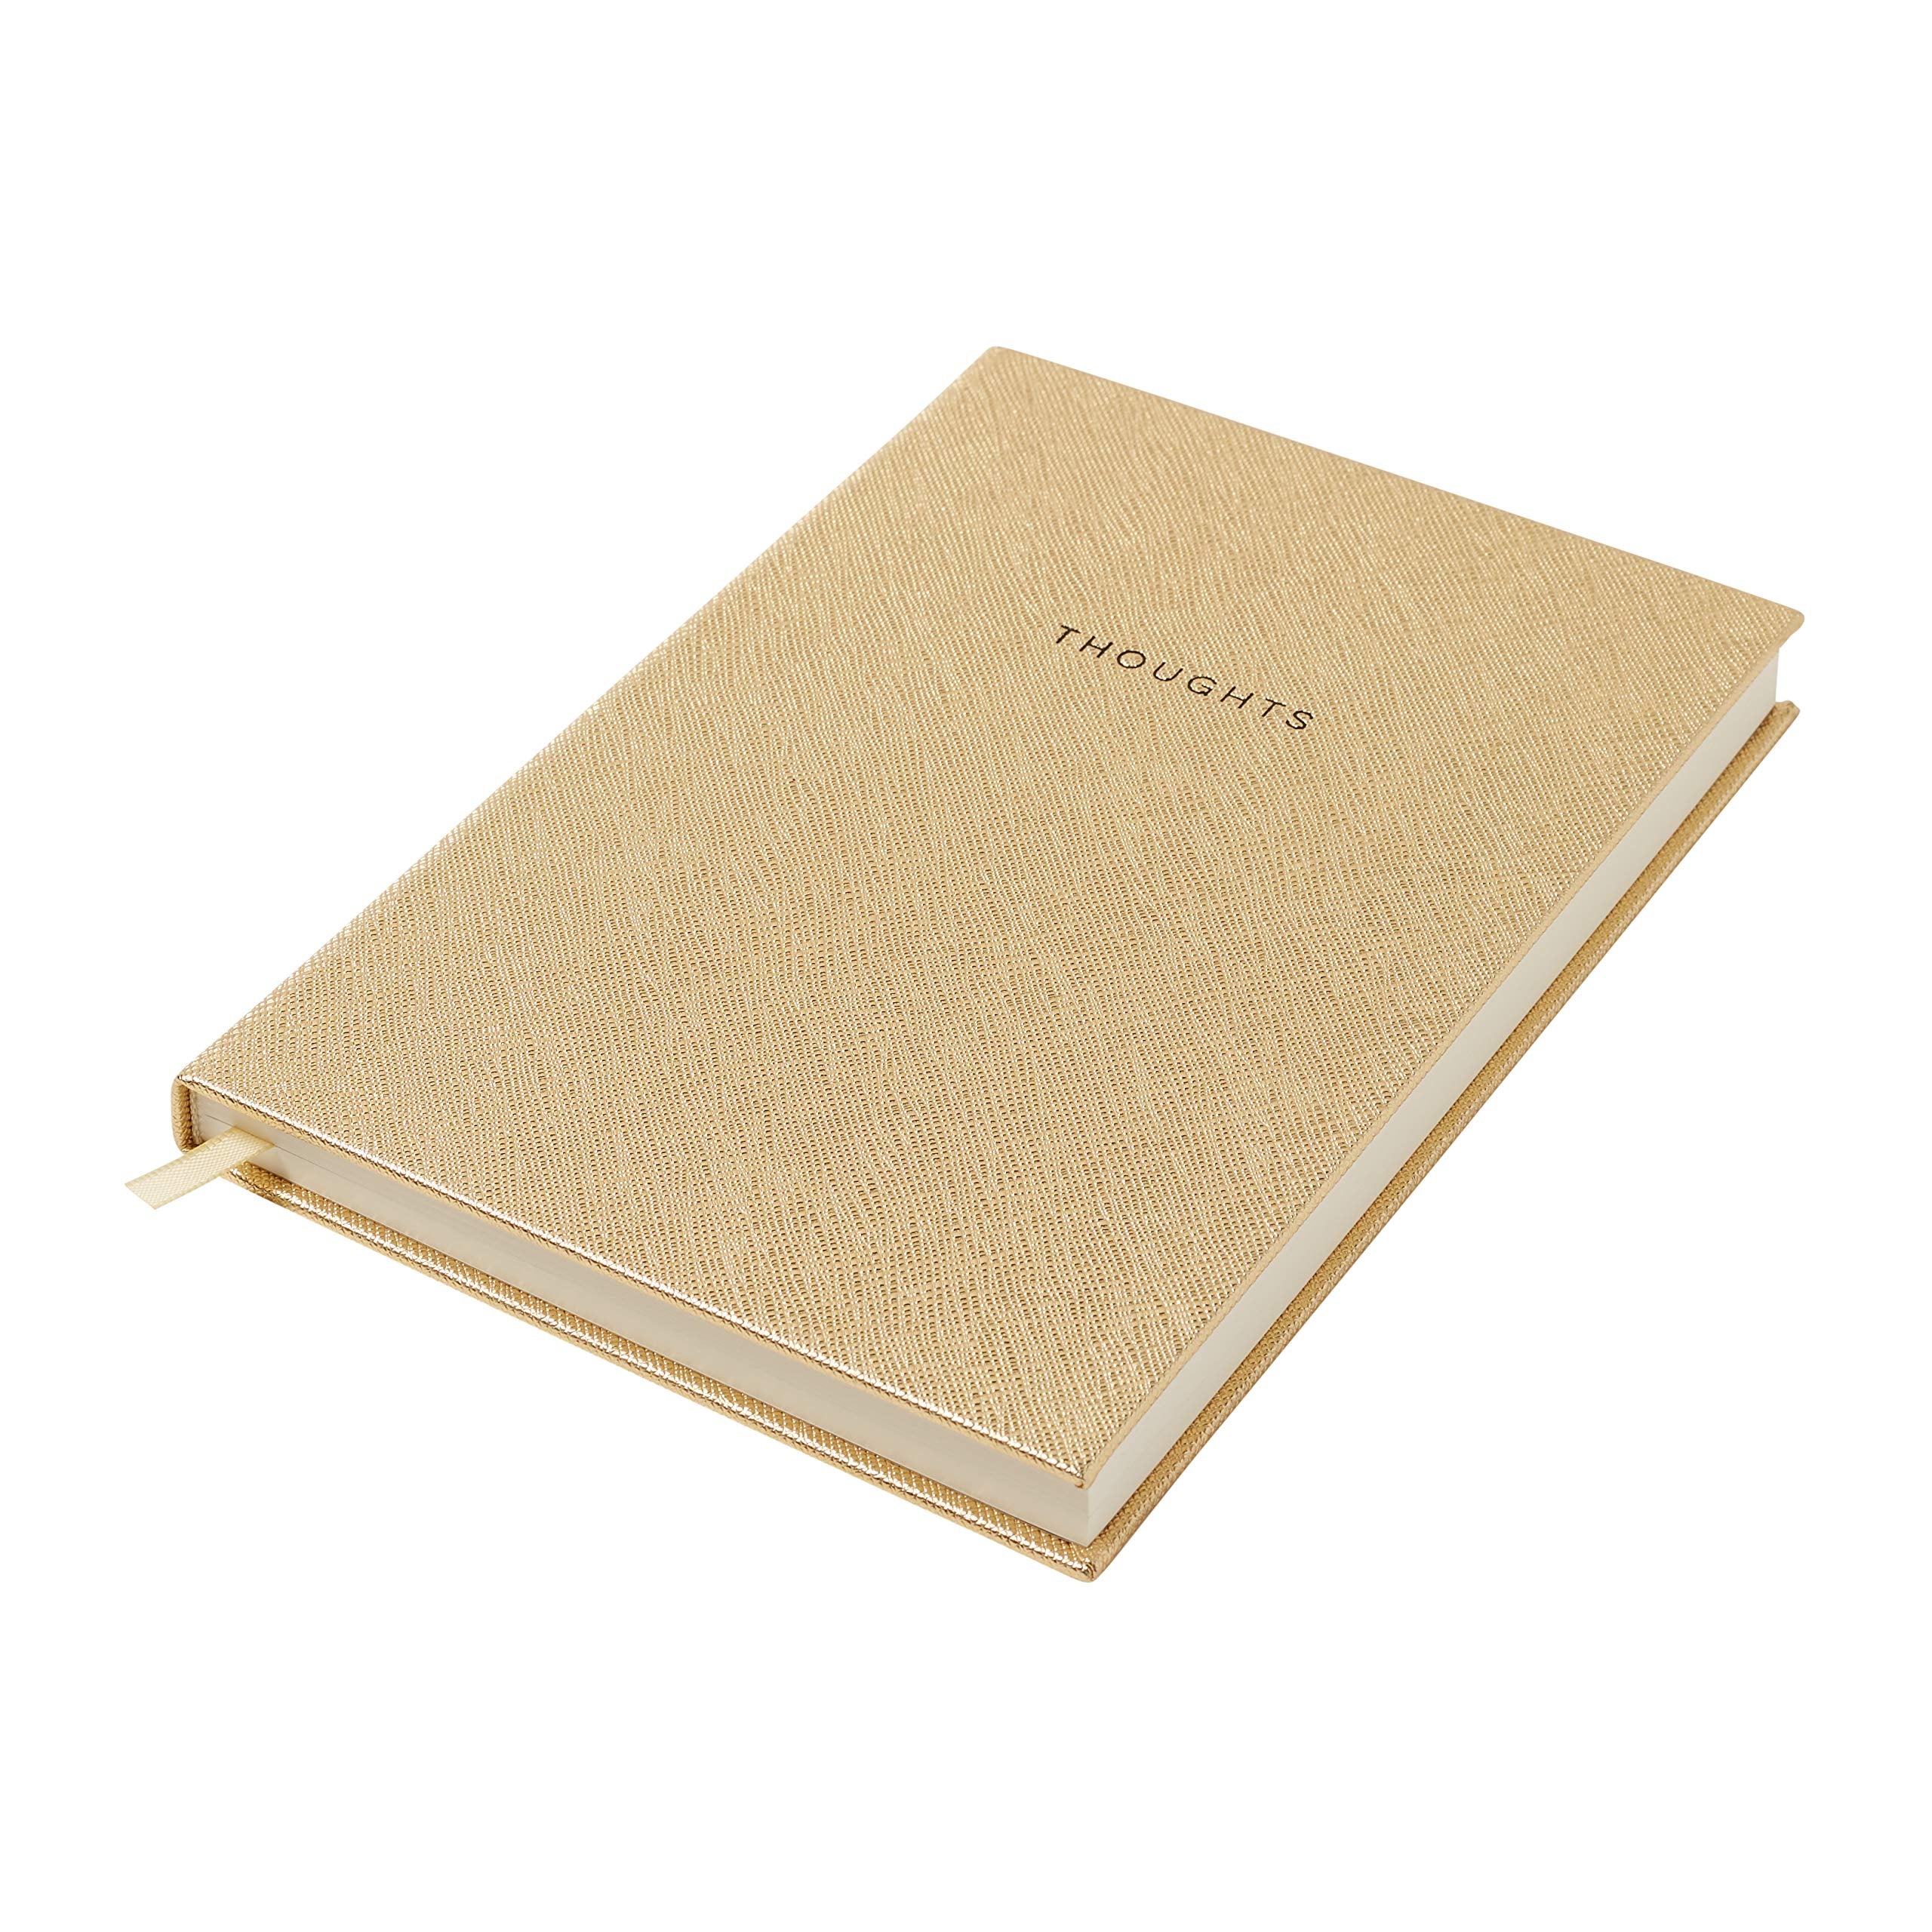 5.75-x-8.25 inches Eccolo Journal Notebook in Gold